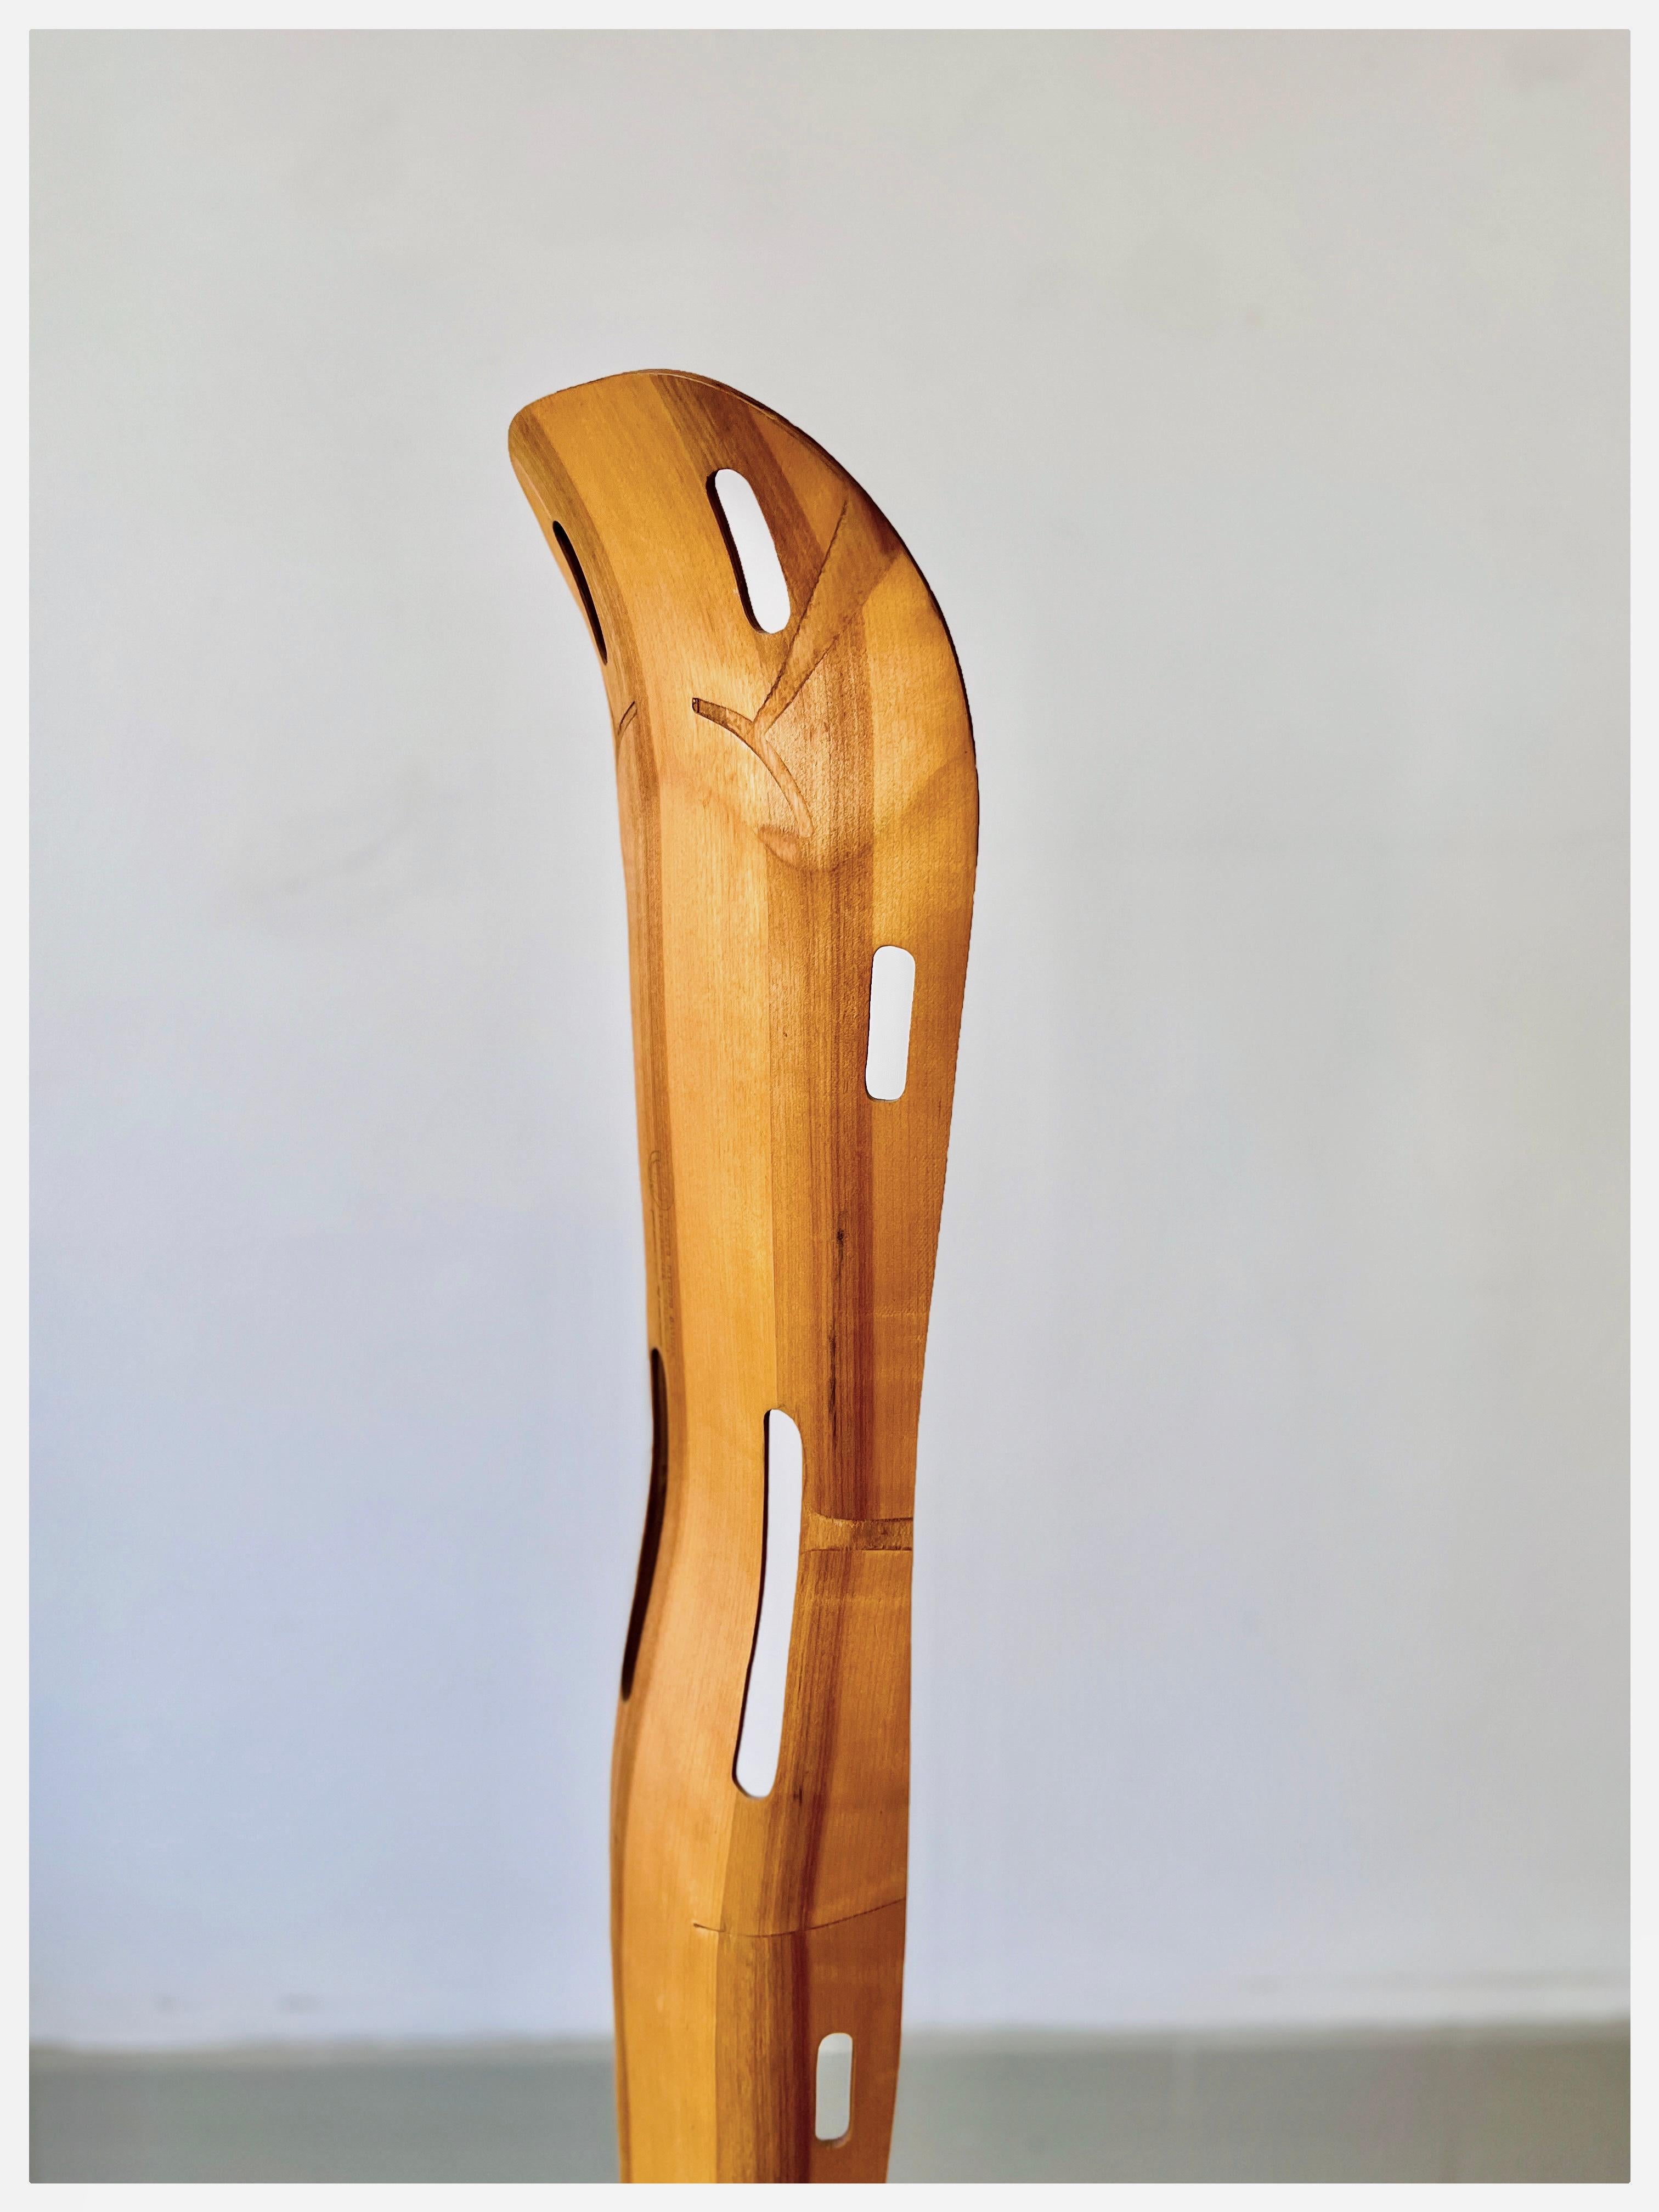 Molded Mid Century Charles & Ray Eames Leg Splint for Evans Products, 1943